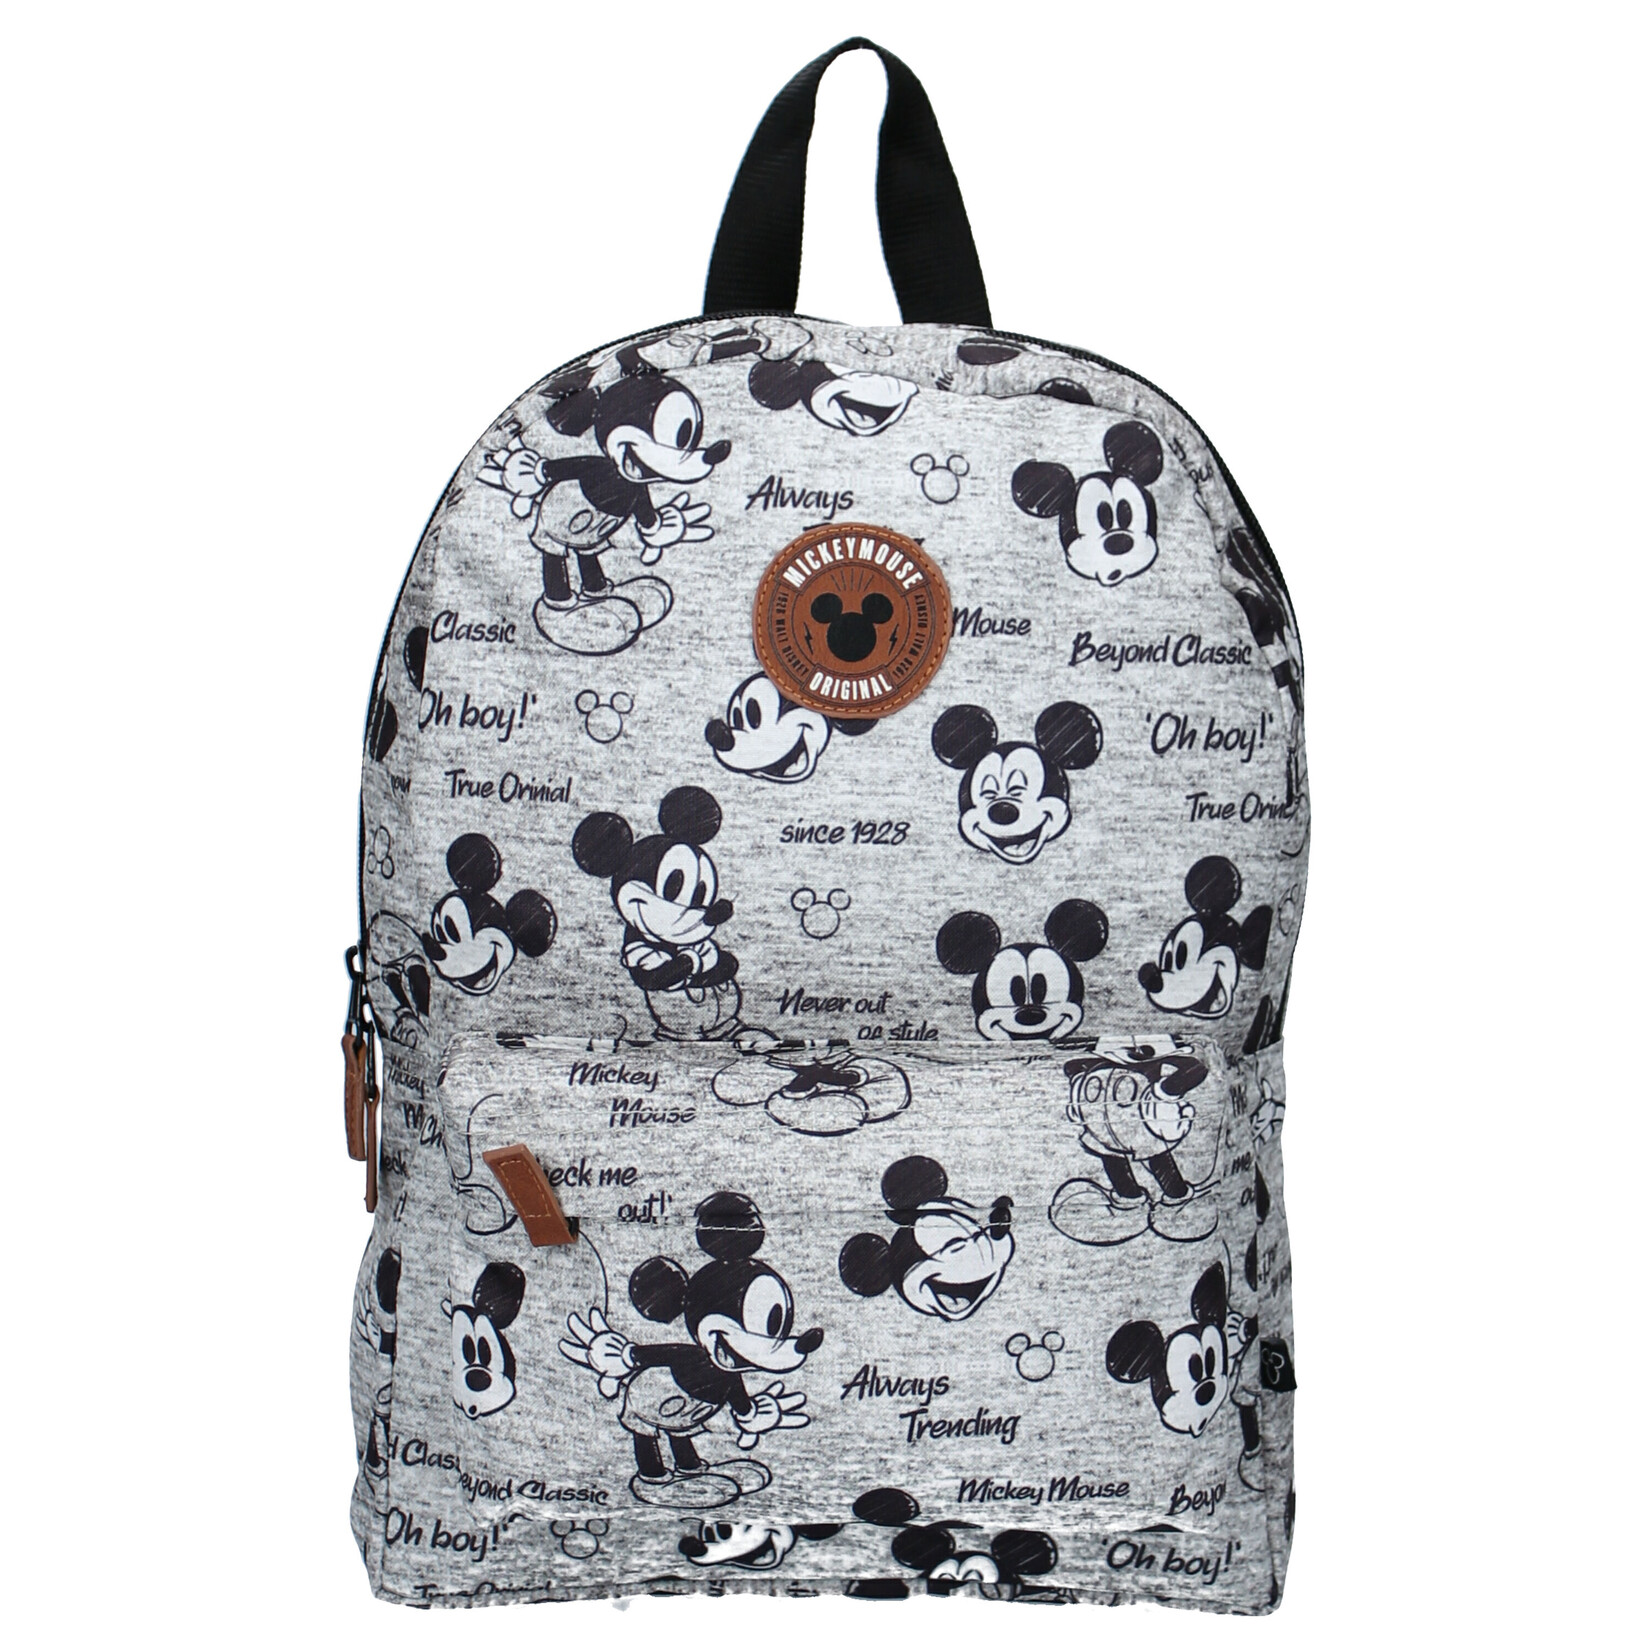 Disney Rucksack Mickey Mouse Never Out of Style - Grau